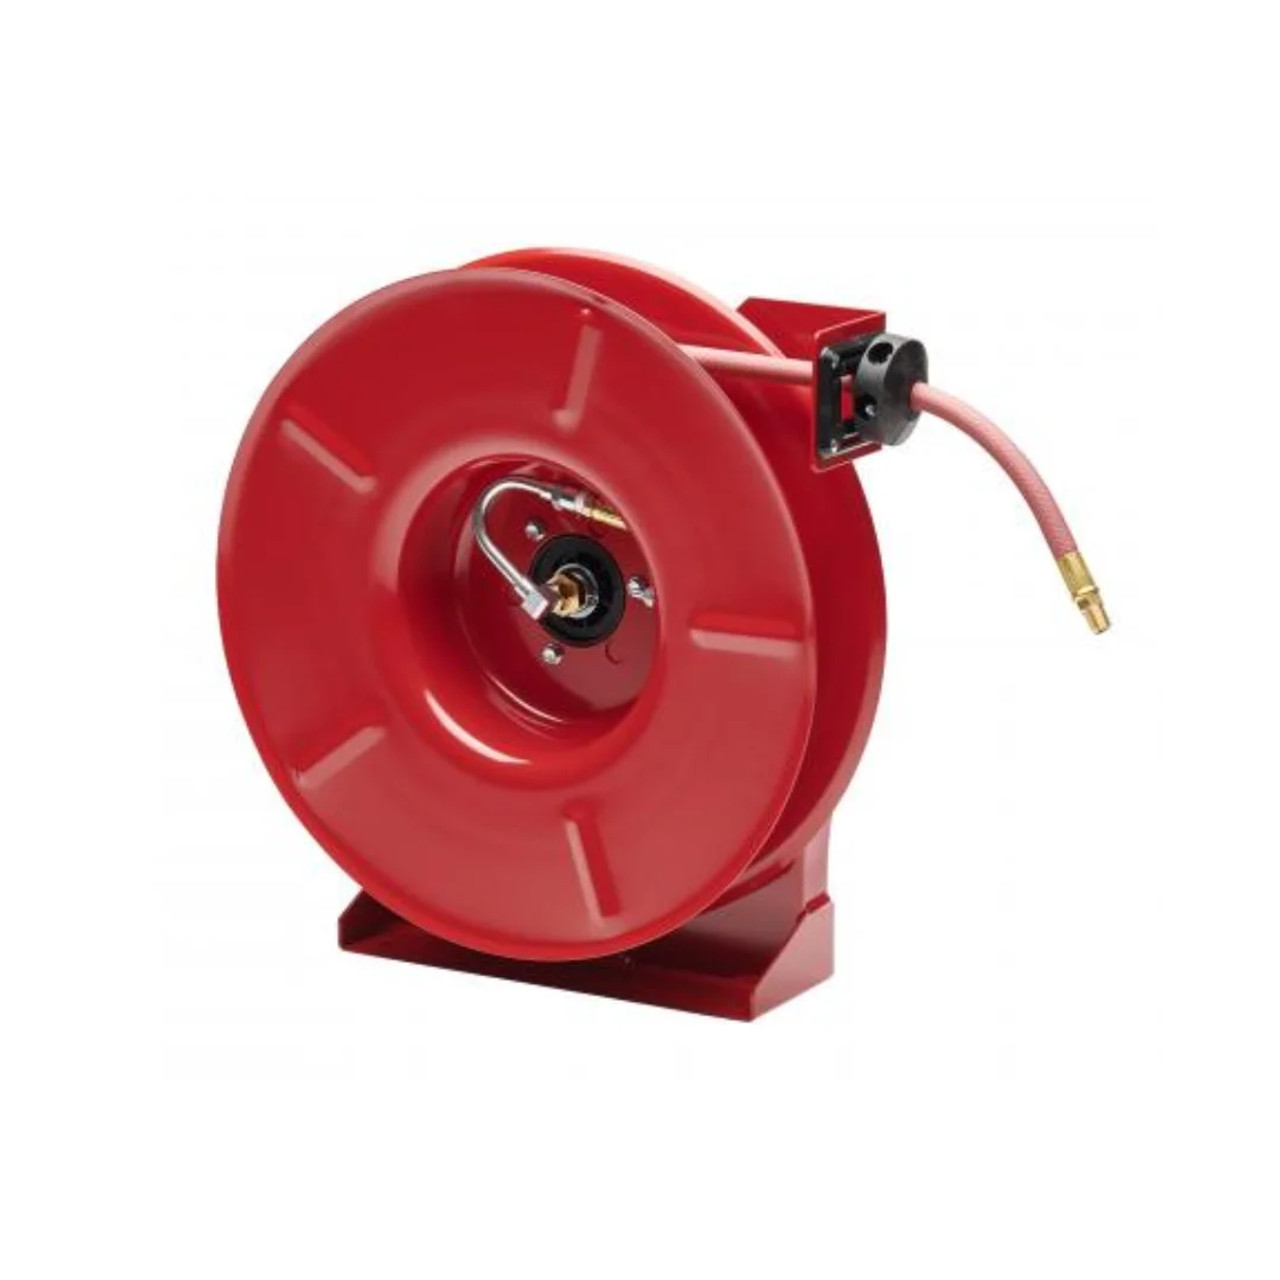 Reelcraft 5650 Olp Air/Water With Hose, 300 Psi Hose Reel, 3/8 X 50Ft Hose  Reel, 3/8 x 50ft